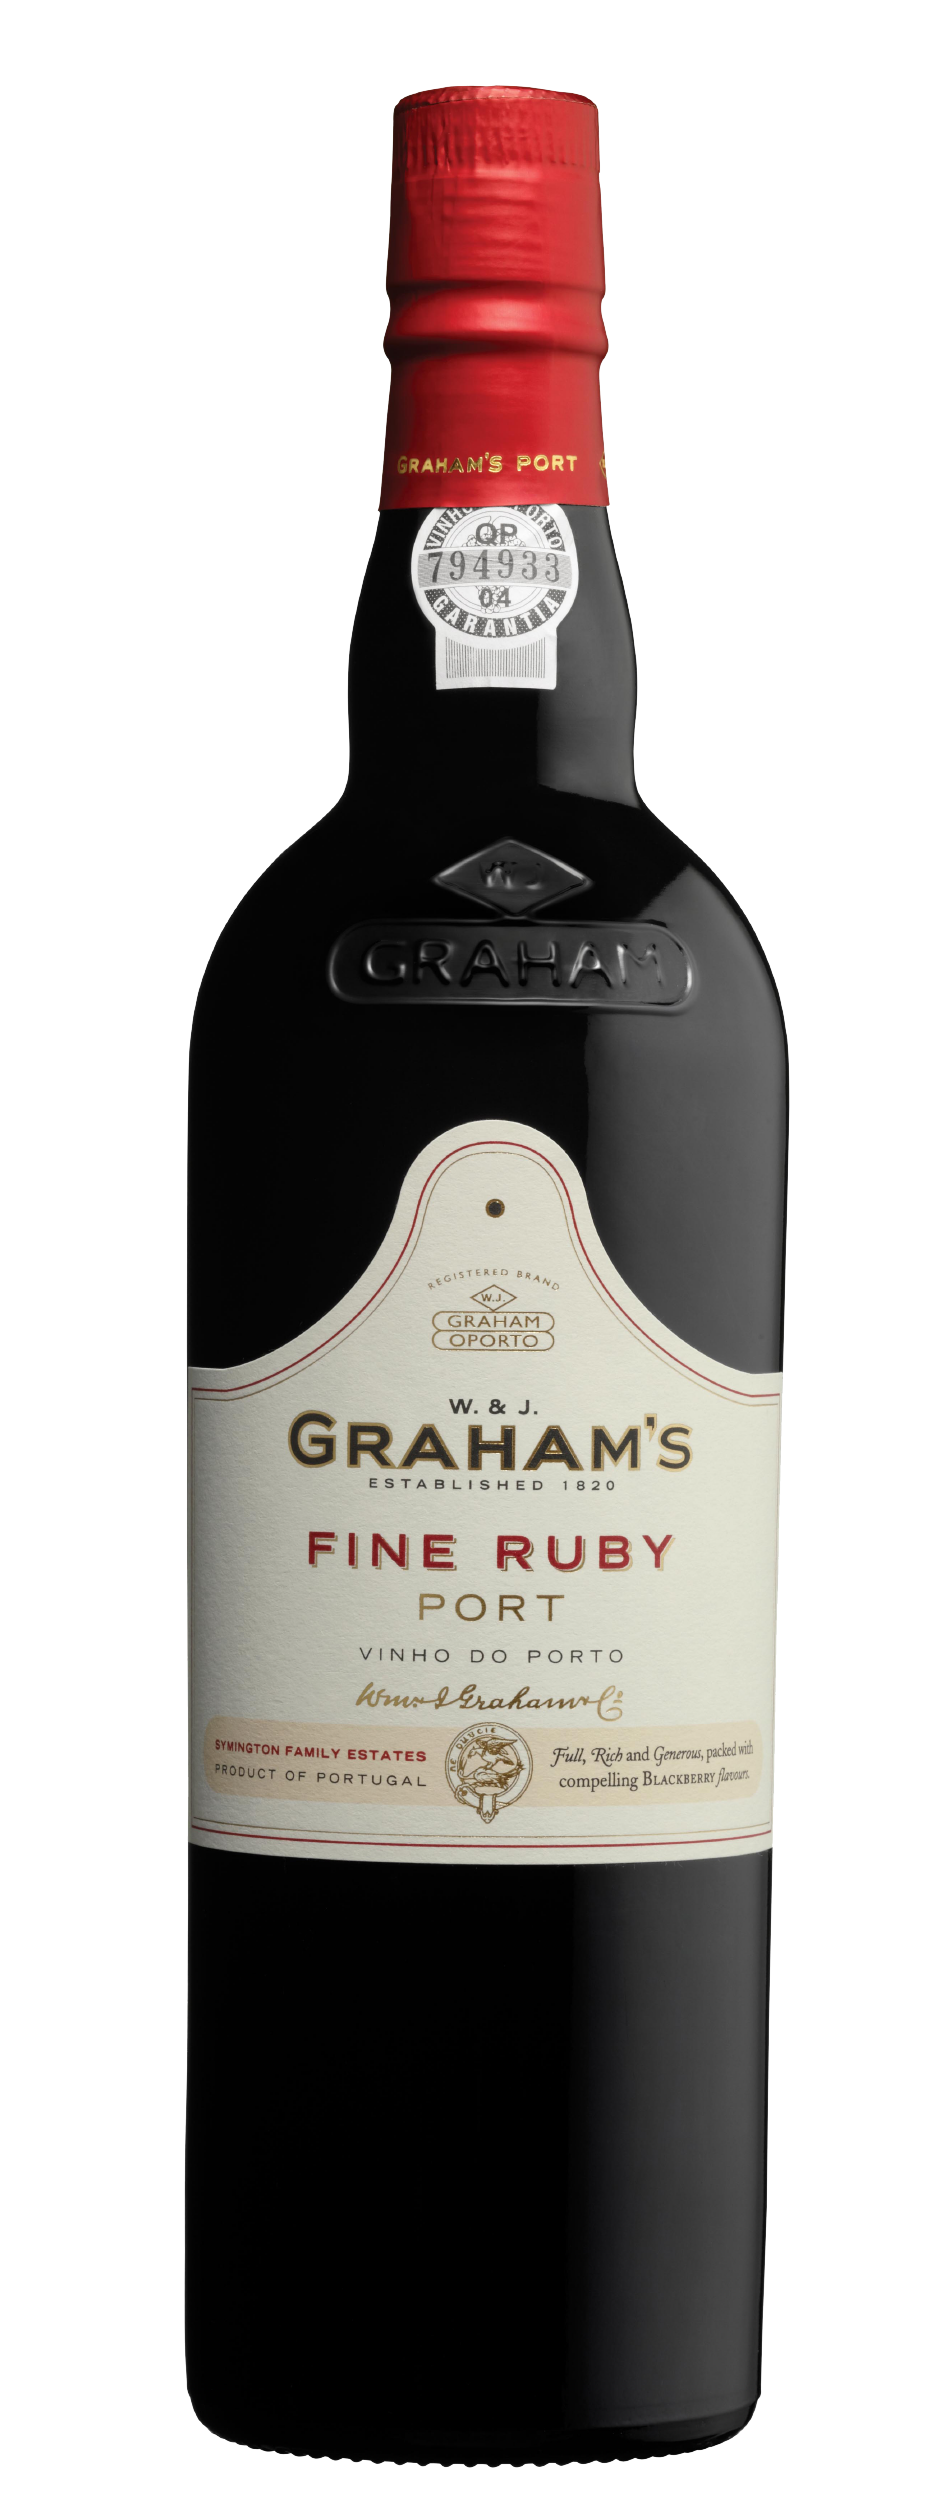 Product Image for GRAHAM'S FINE RUBY PORT